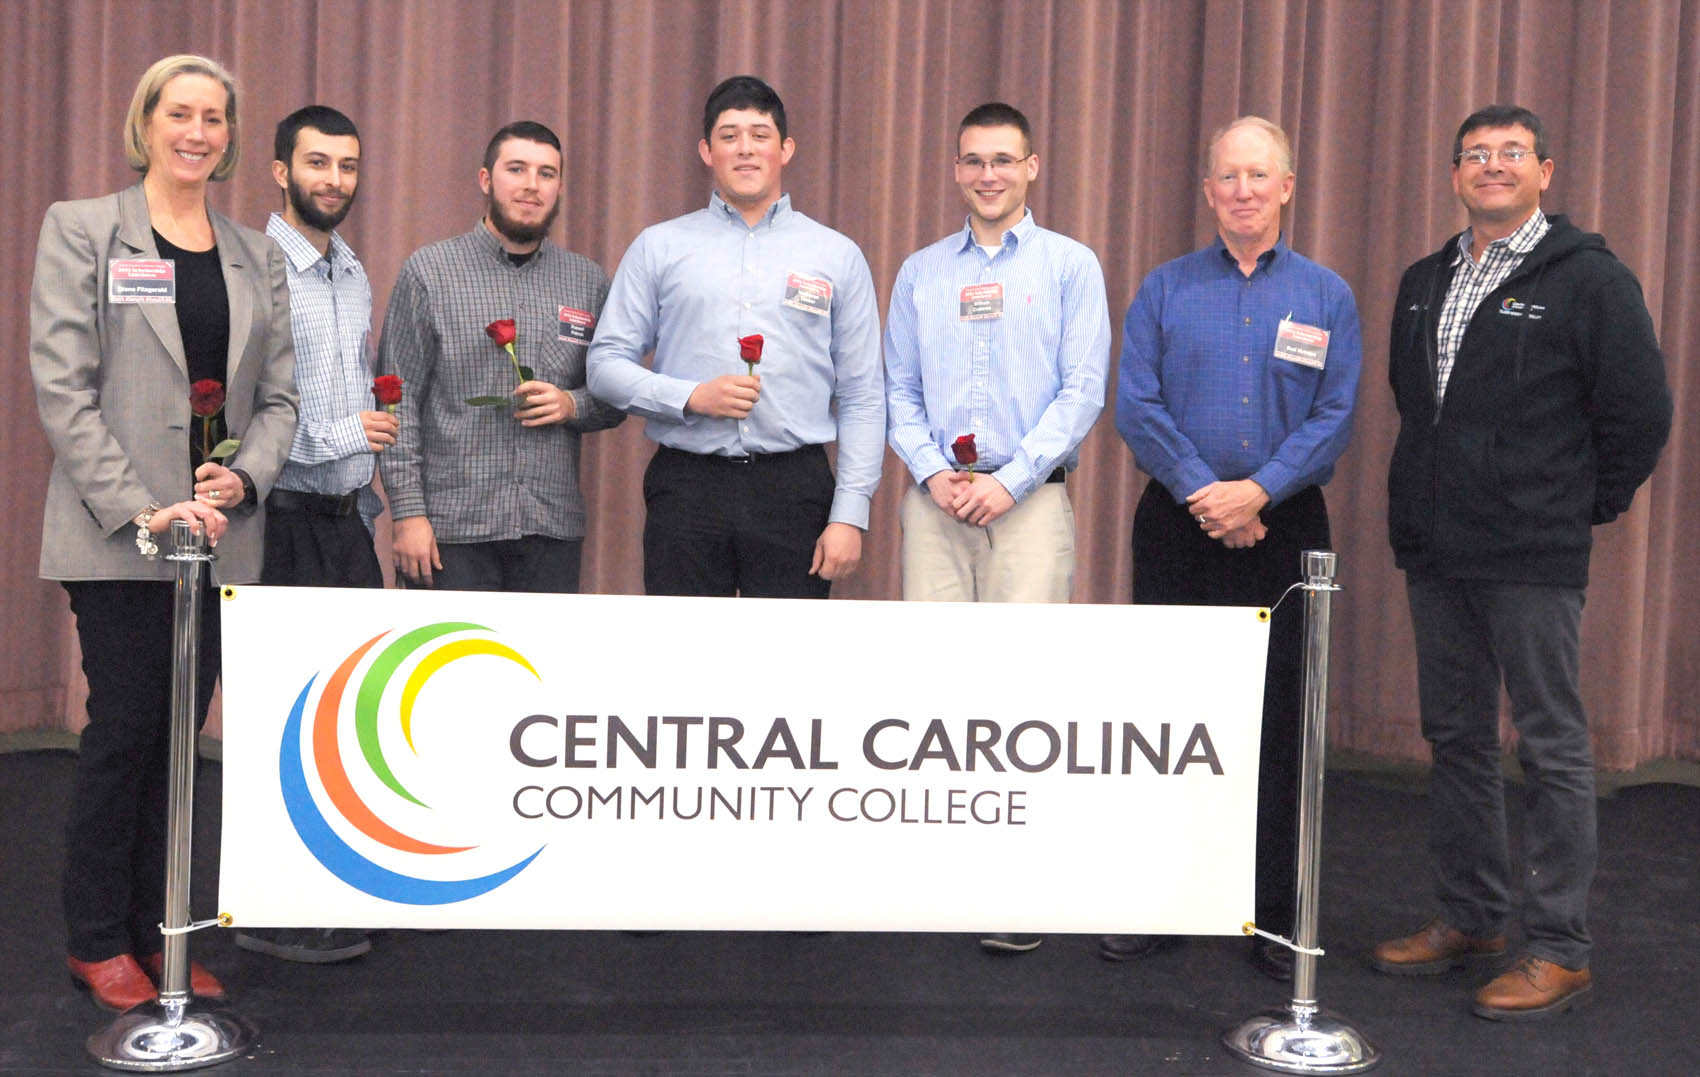 Hagerty Education Program official visits CCCC